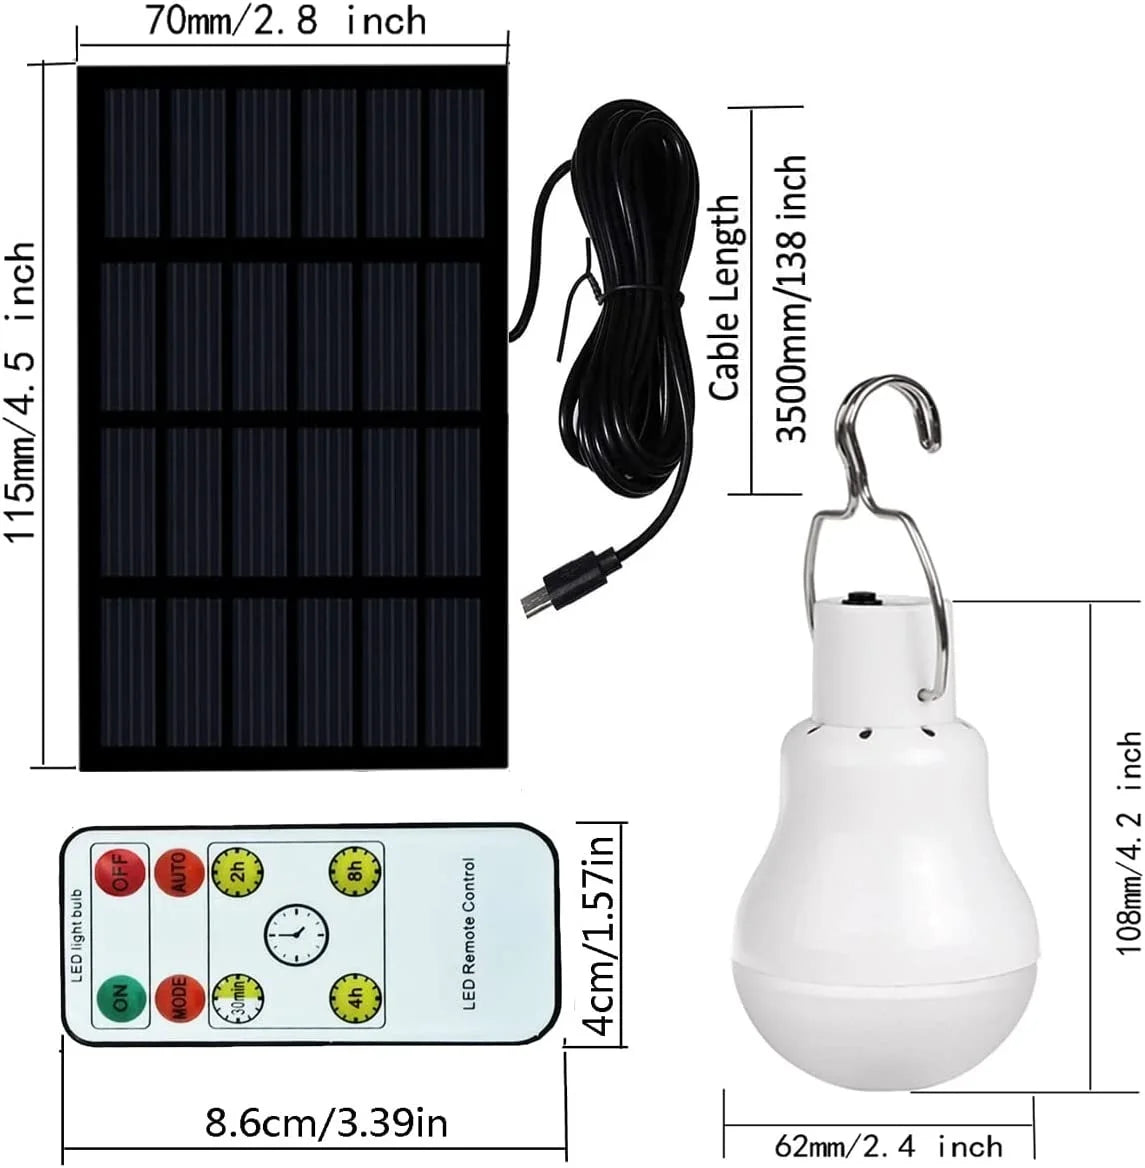 LED Solar Bulb Light, Waterproof solar-powered lamp with USB charging, ideal for outdoor use during emergencies or power outages.